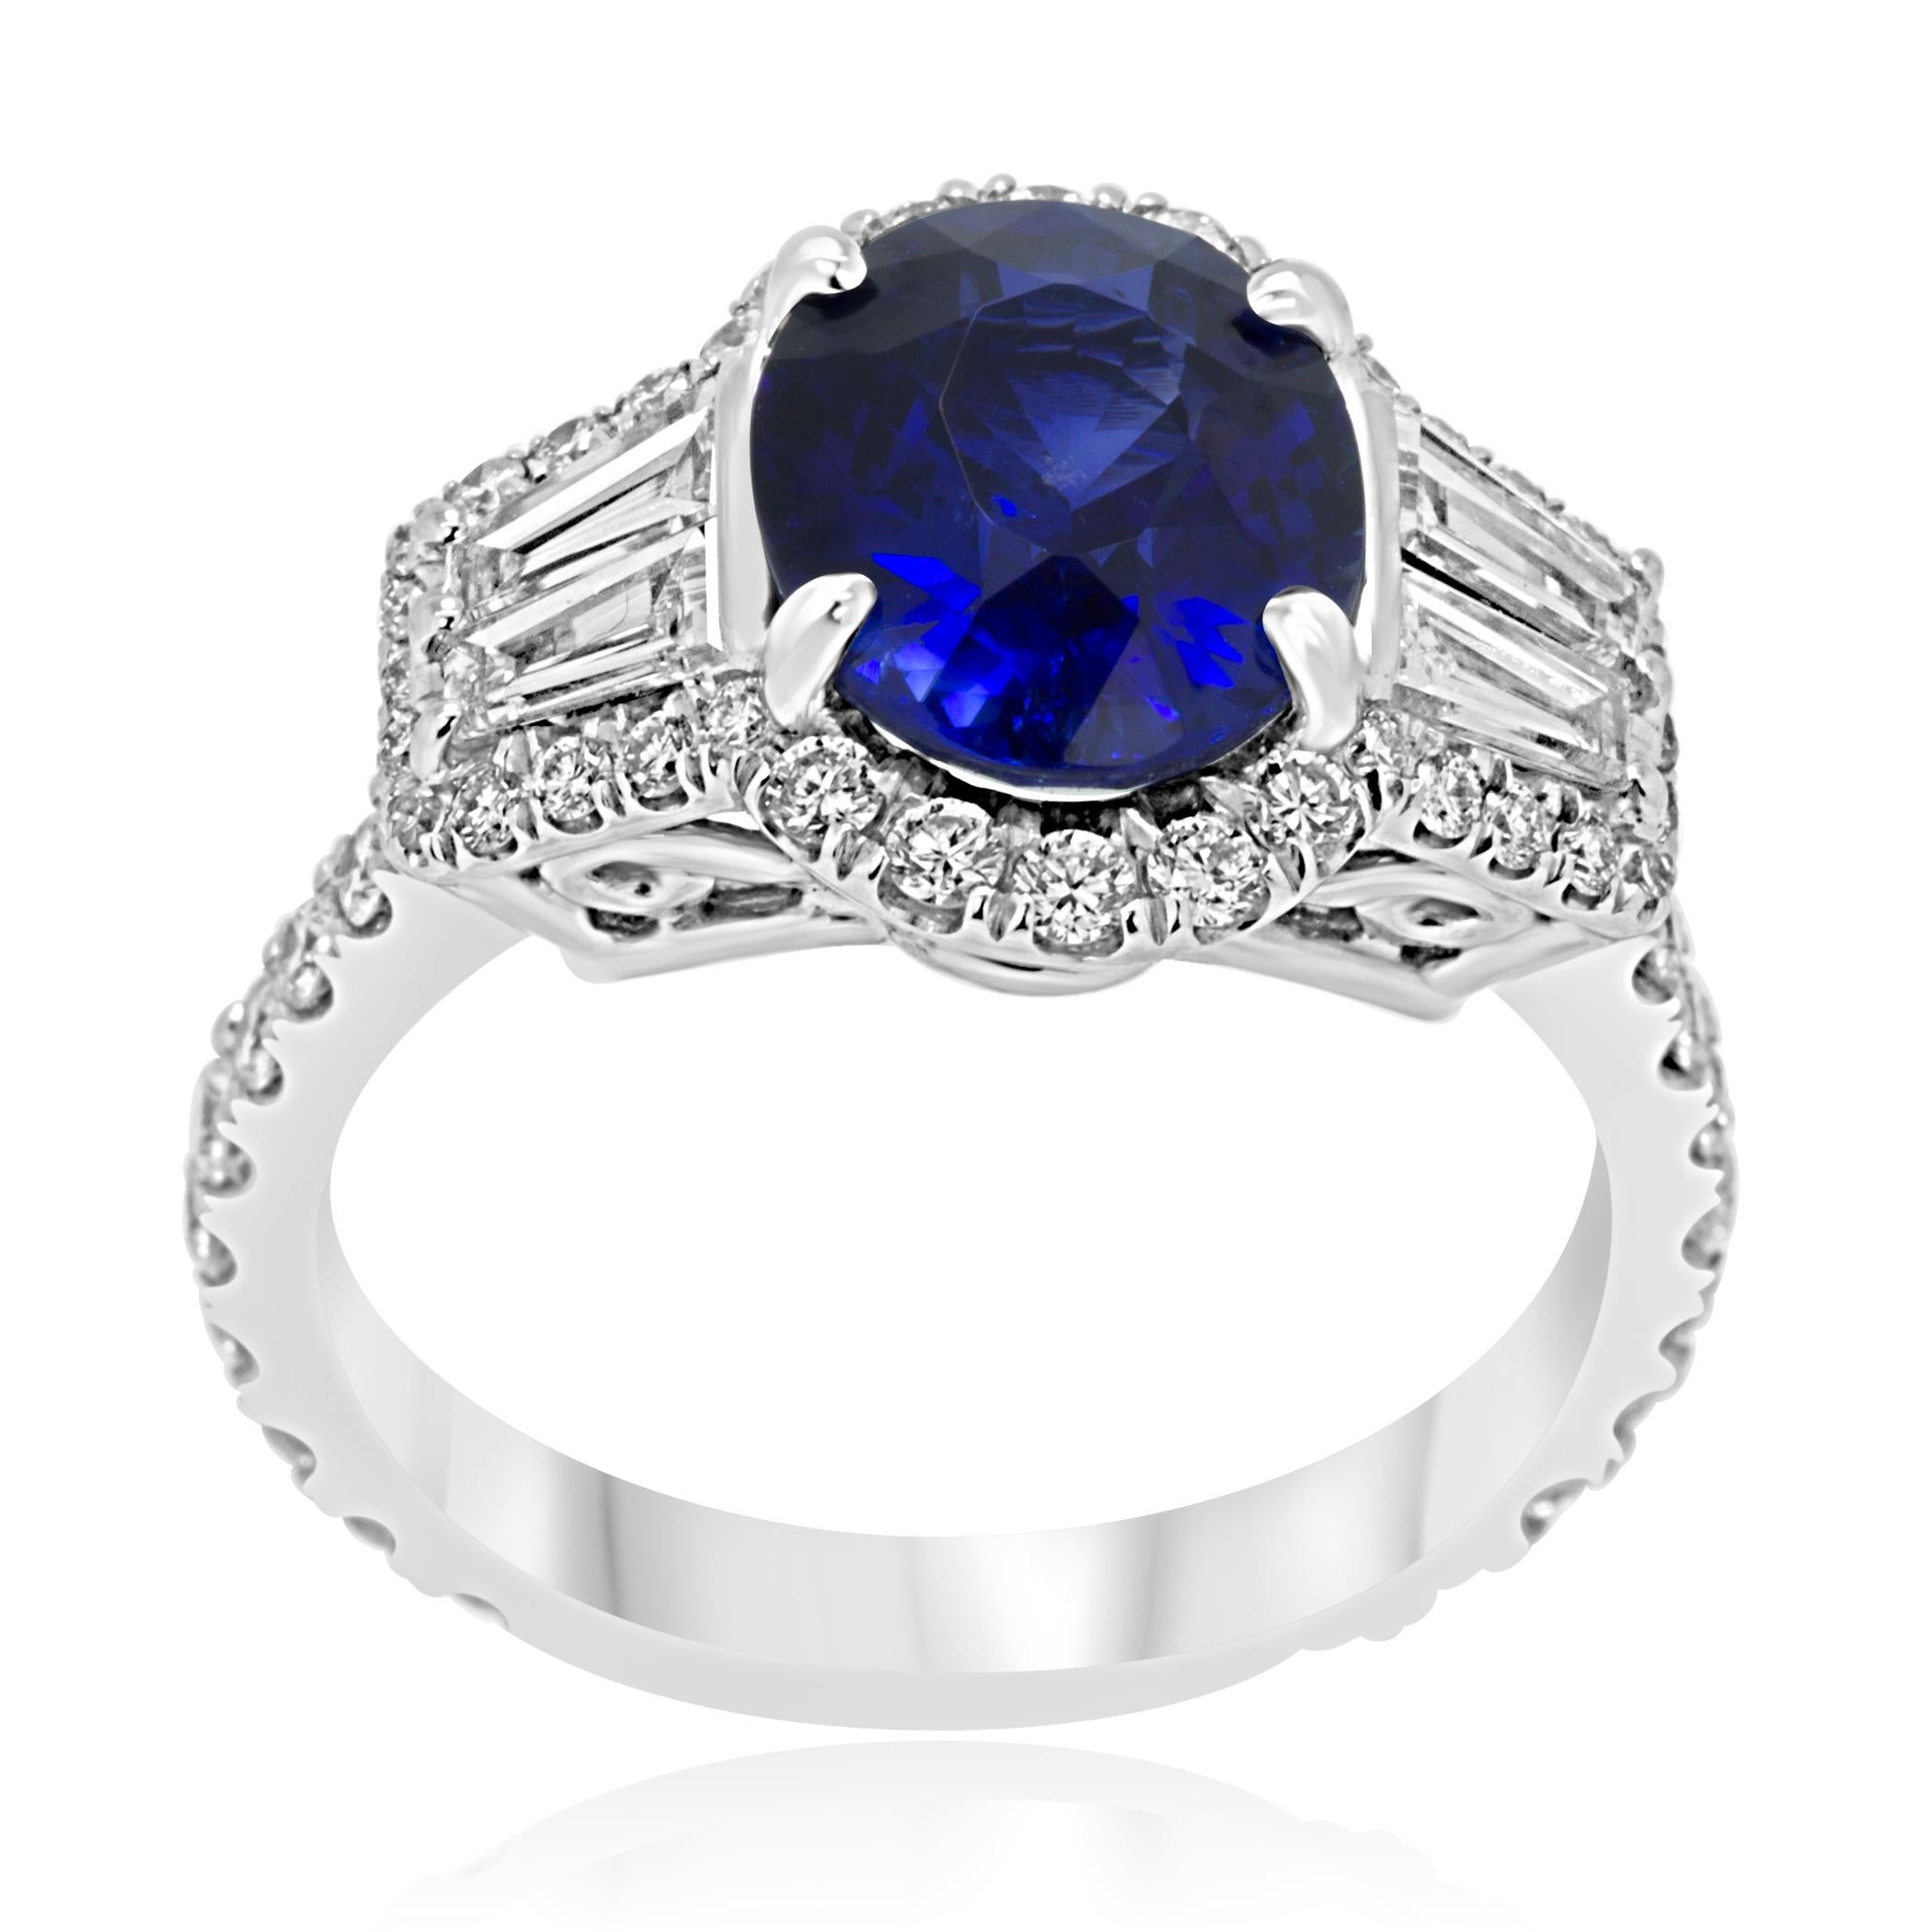 Contemporary GIA Certified Blue Sapphire 3.34 Carat Diamond Halo Gold Bridal Fashion Ring